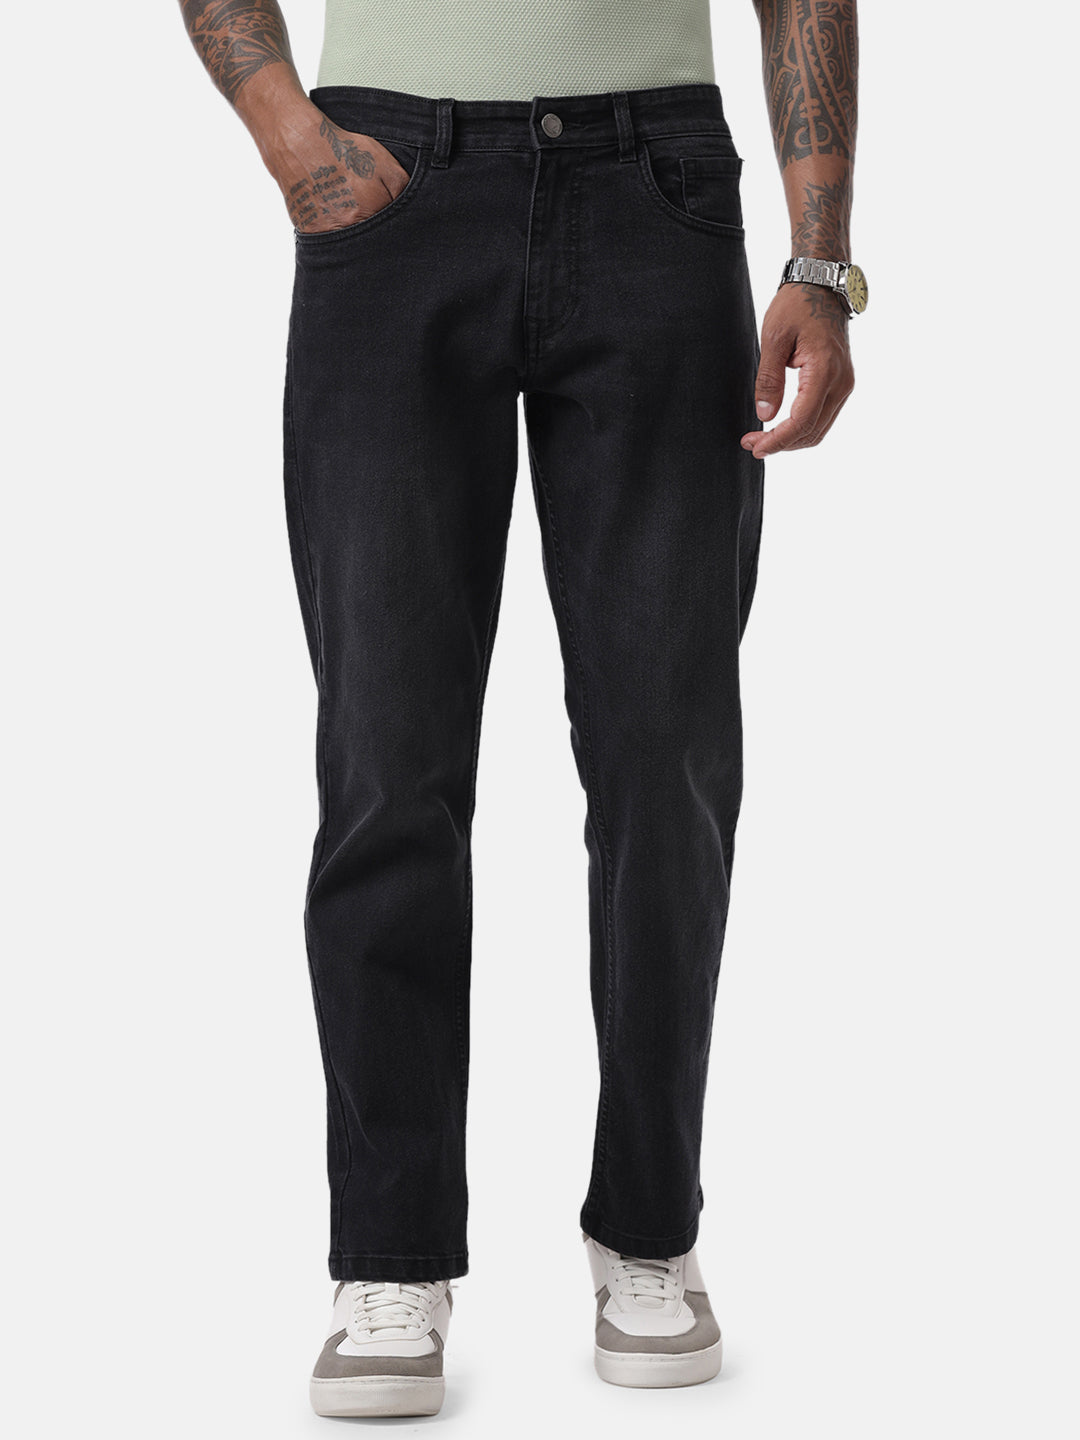 Basic Black Relaxed Fit Jeans